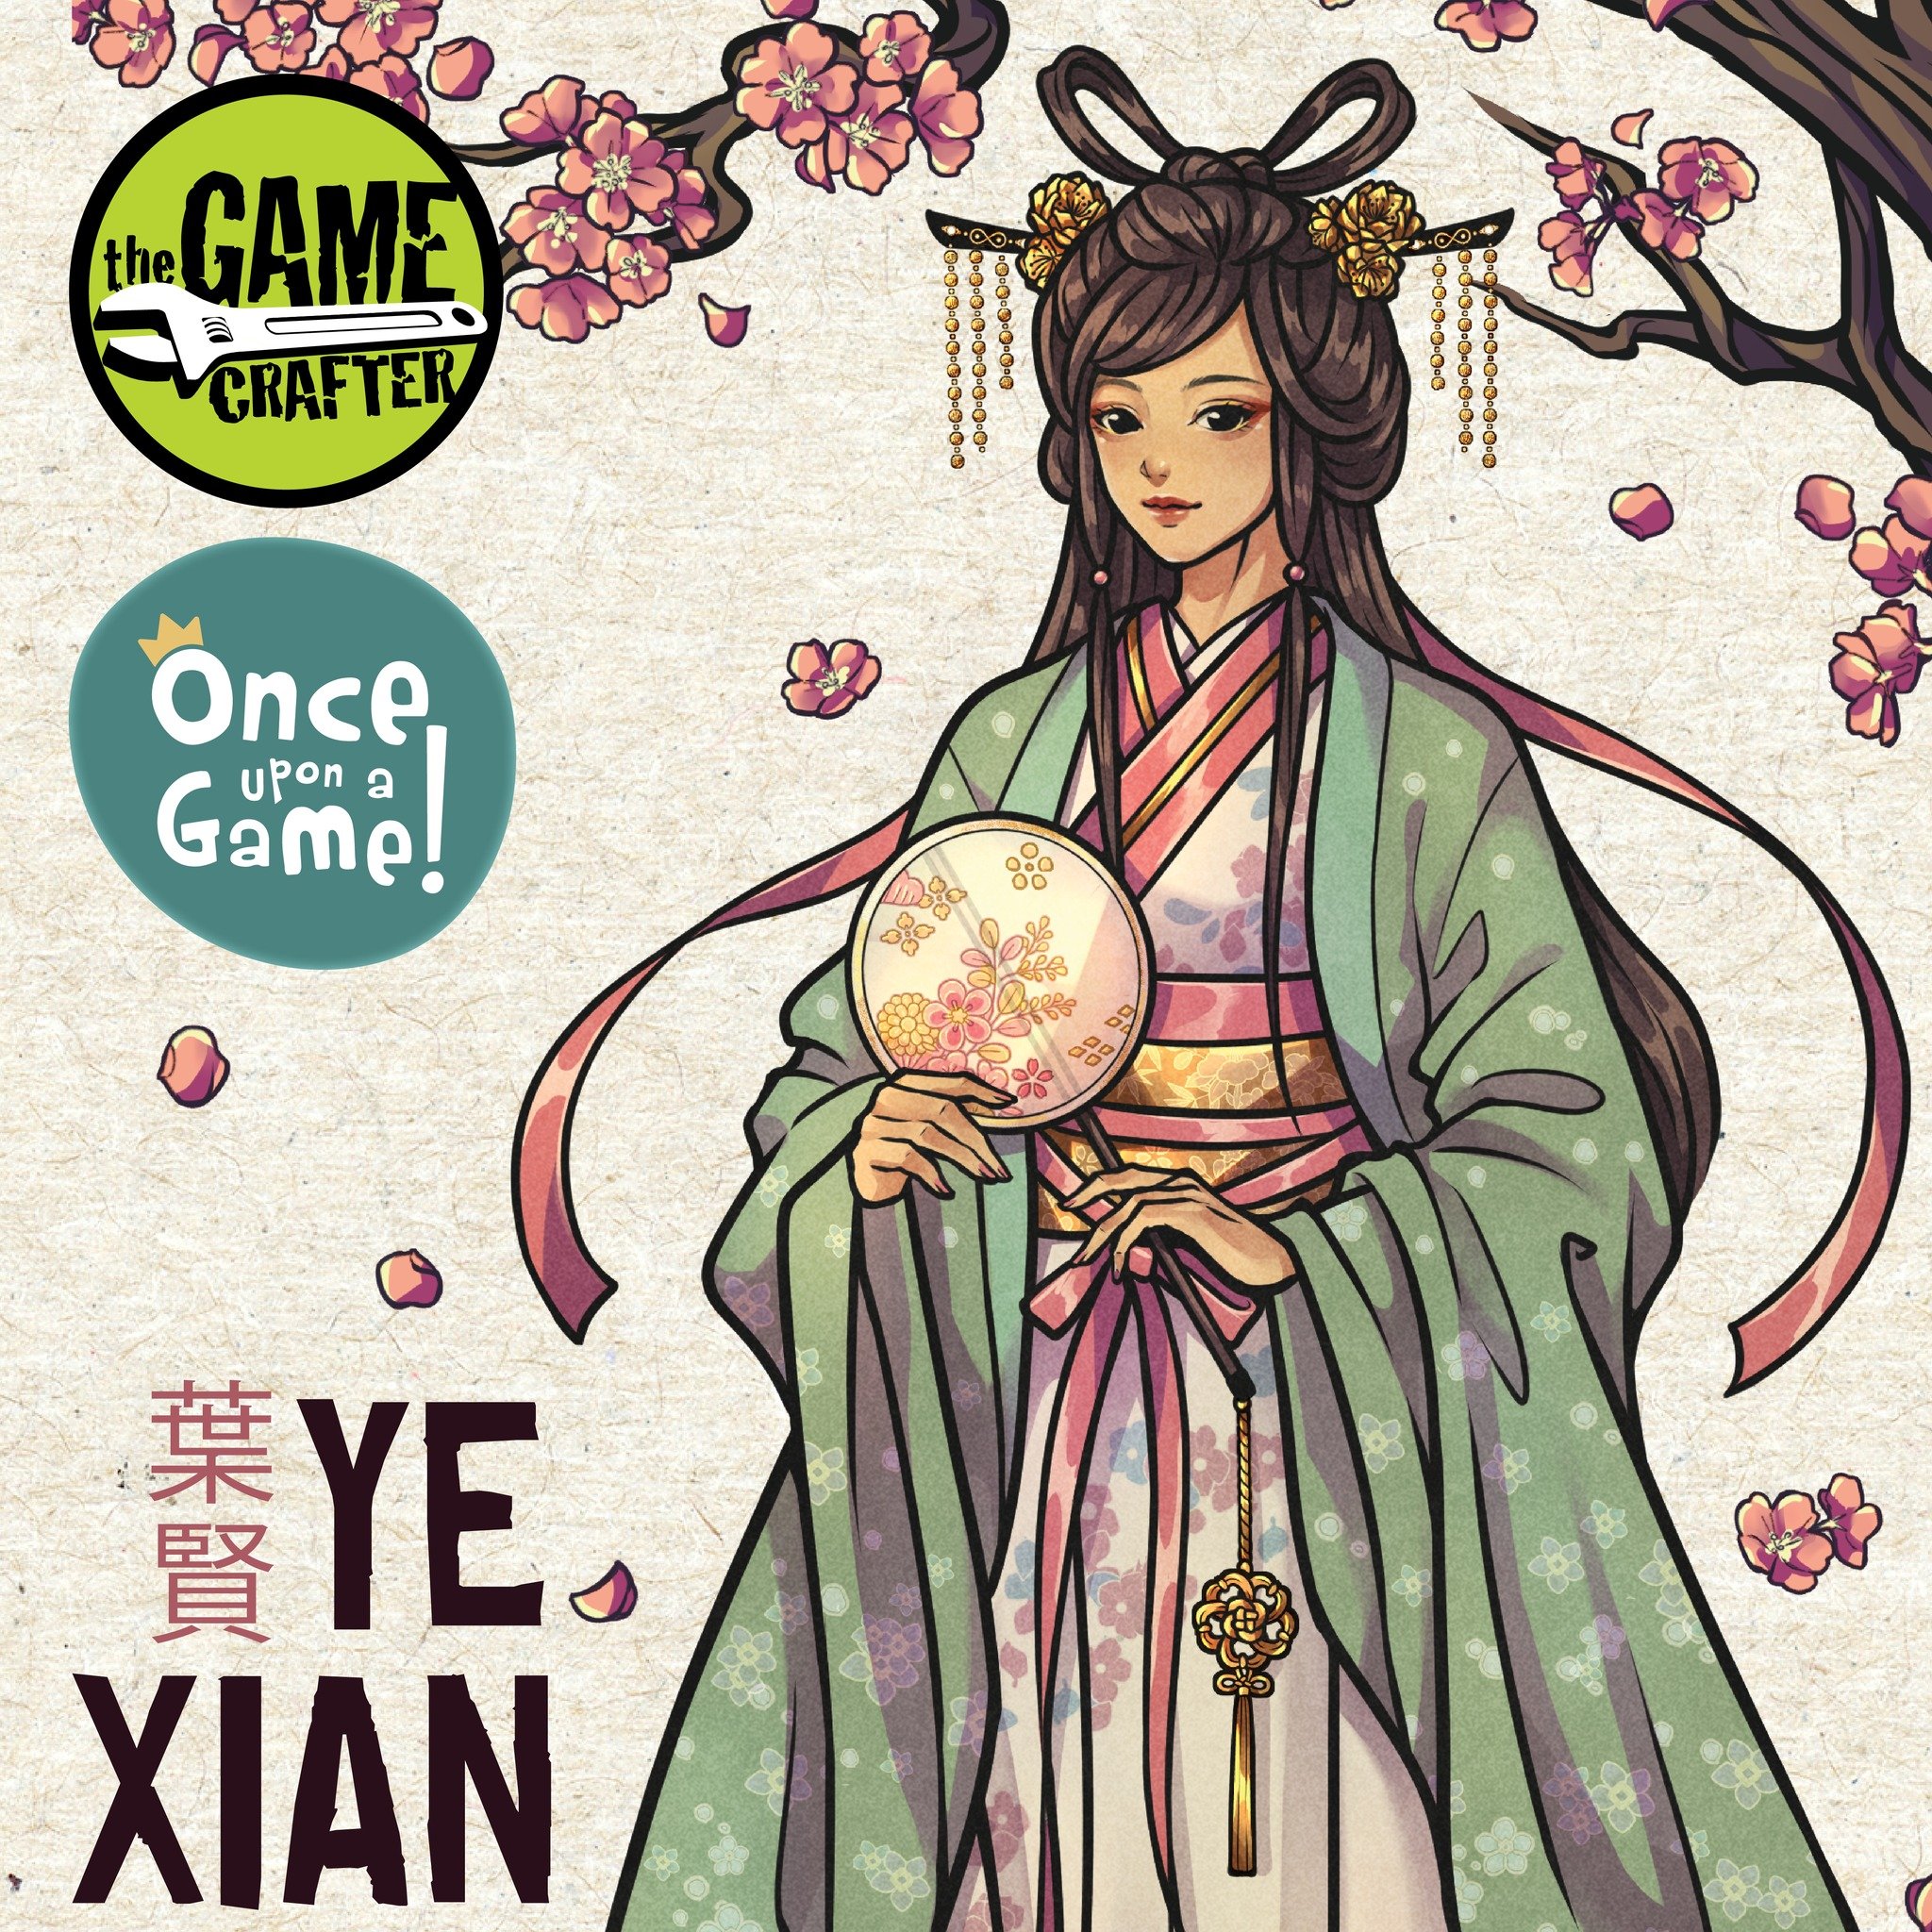 YE XIAN is FINALLY here! 

After almost 2 years of development, playtesting and design, I am pleased to announce that our second game is available to purchase starting TODAY! 

To learn more about this game or purchase a copy for yourself visit the l